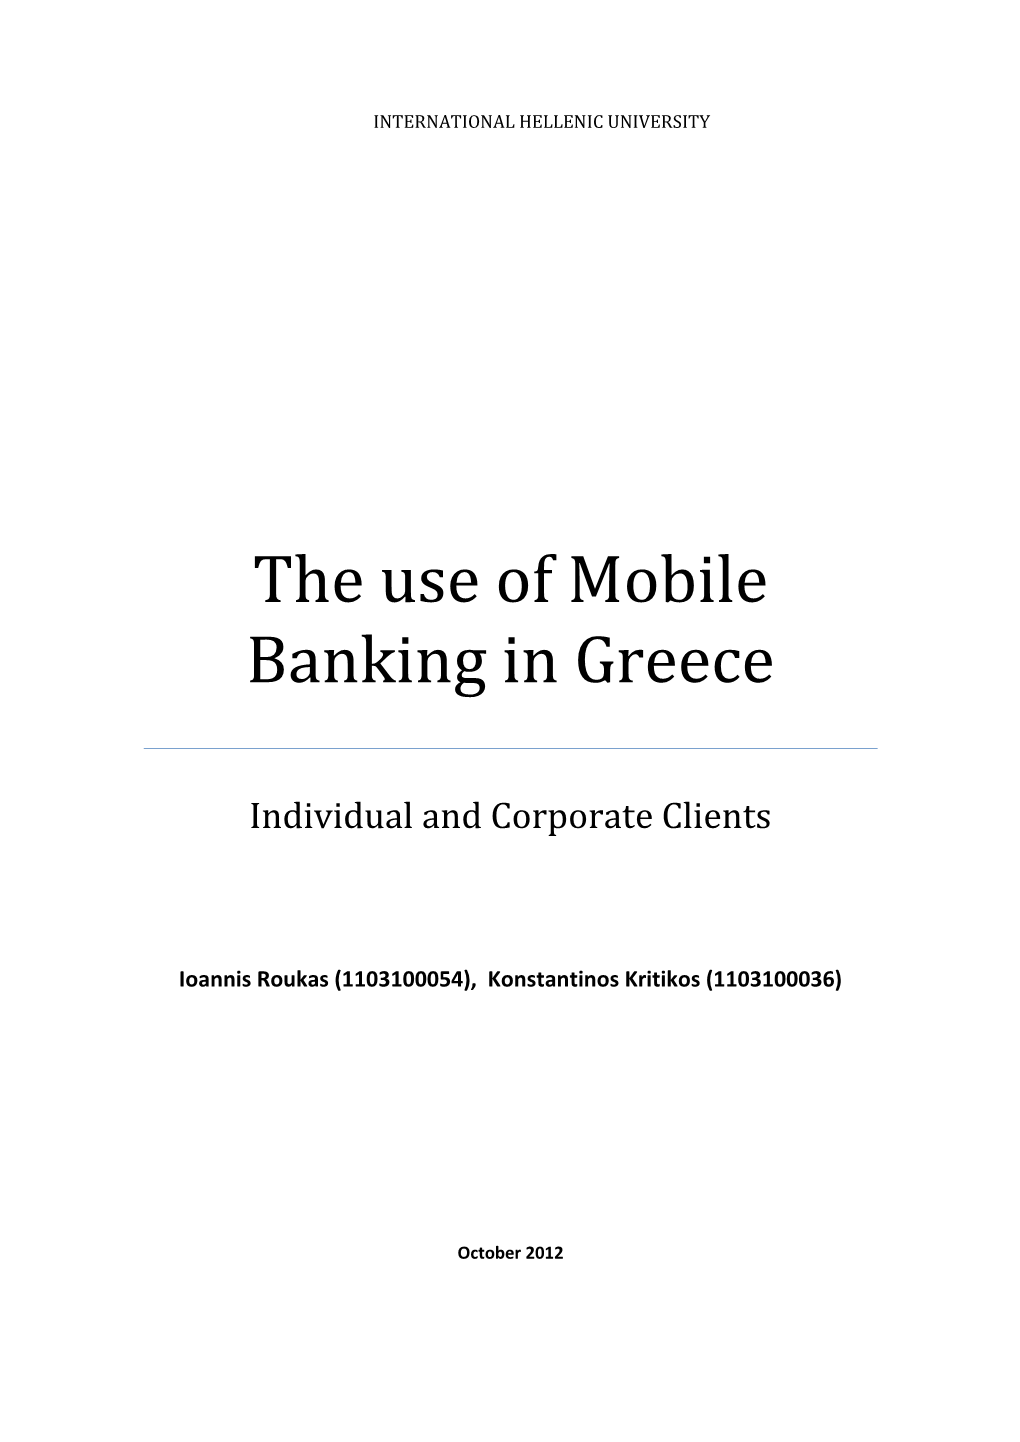 The Use of Mobile Banking in Greece